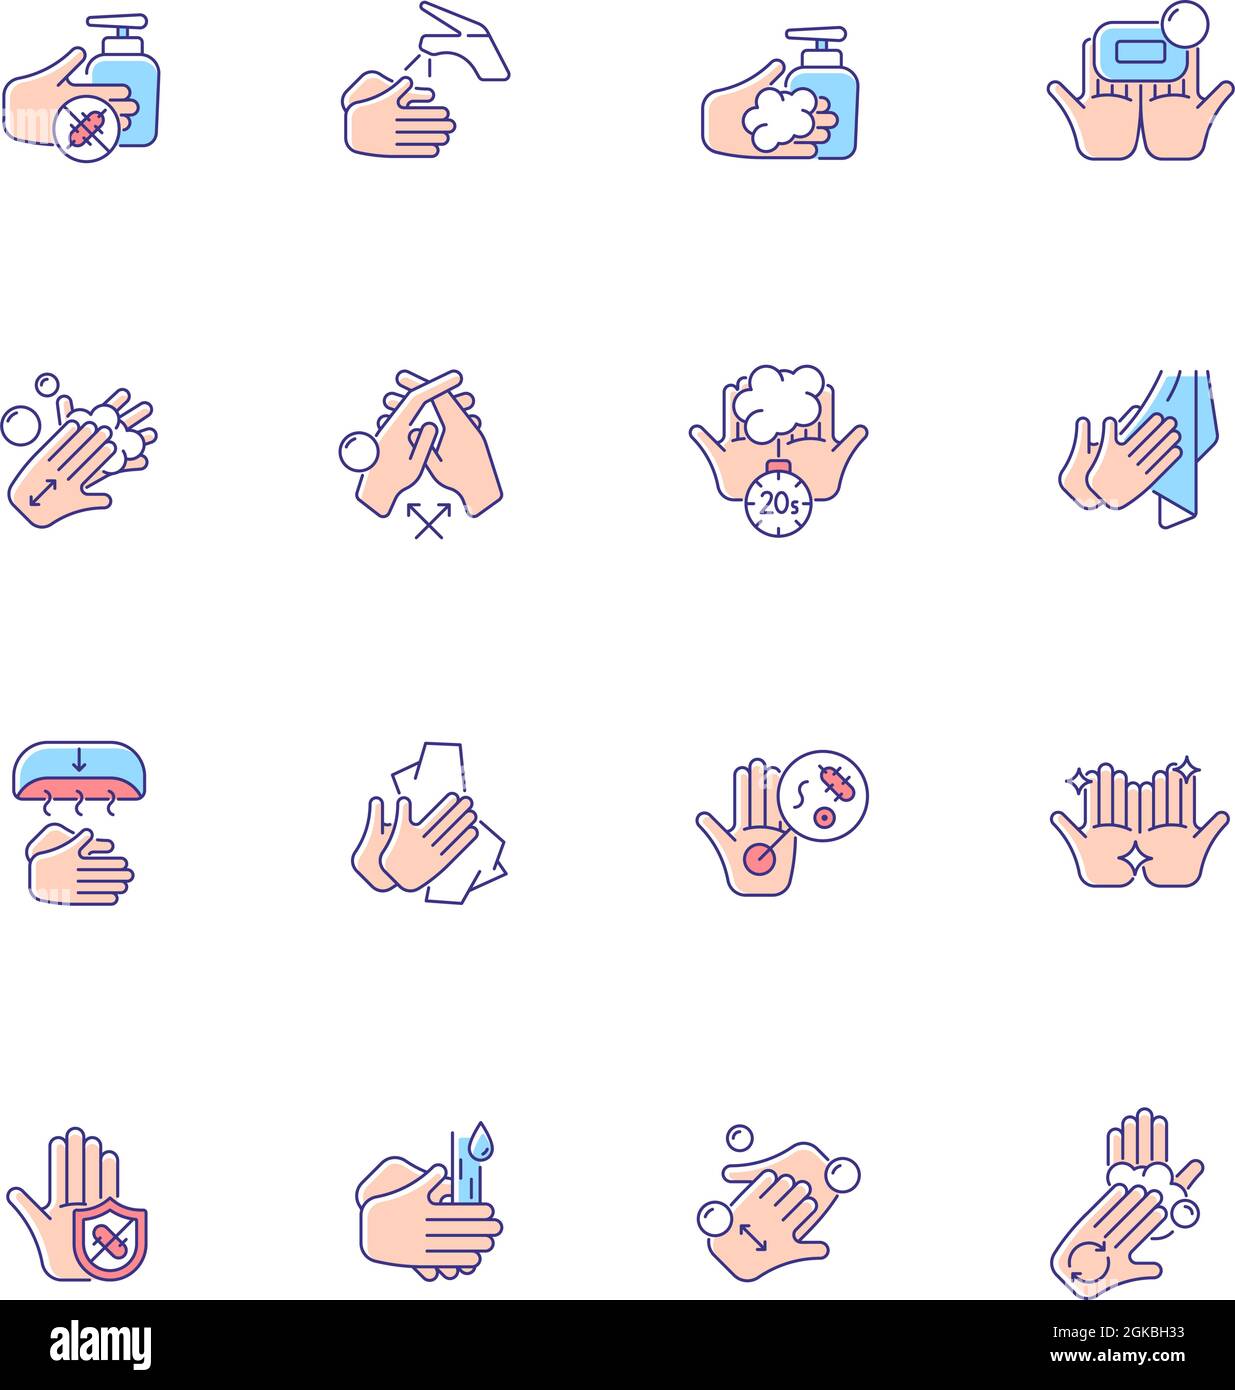 Keeping hands clean RGB color icons set Stock Vector